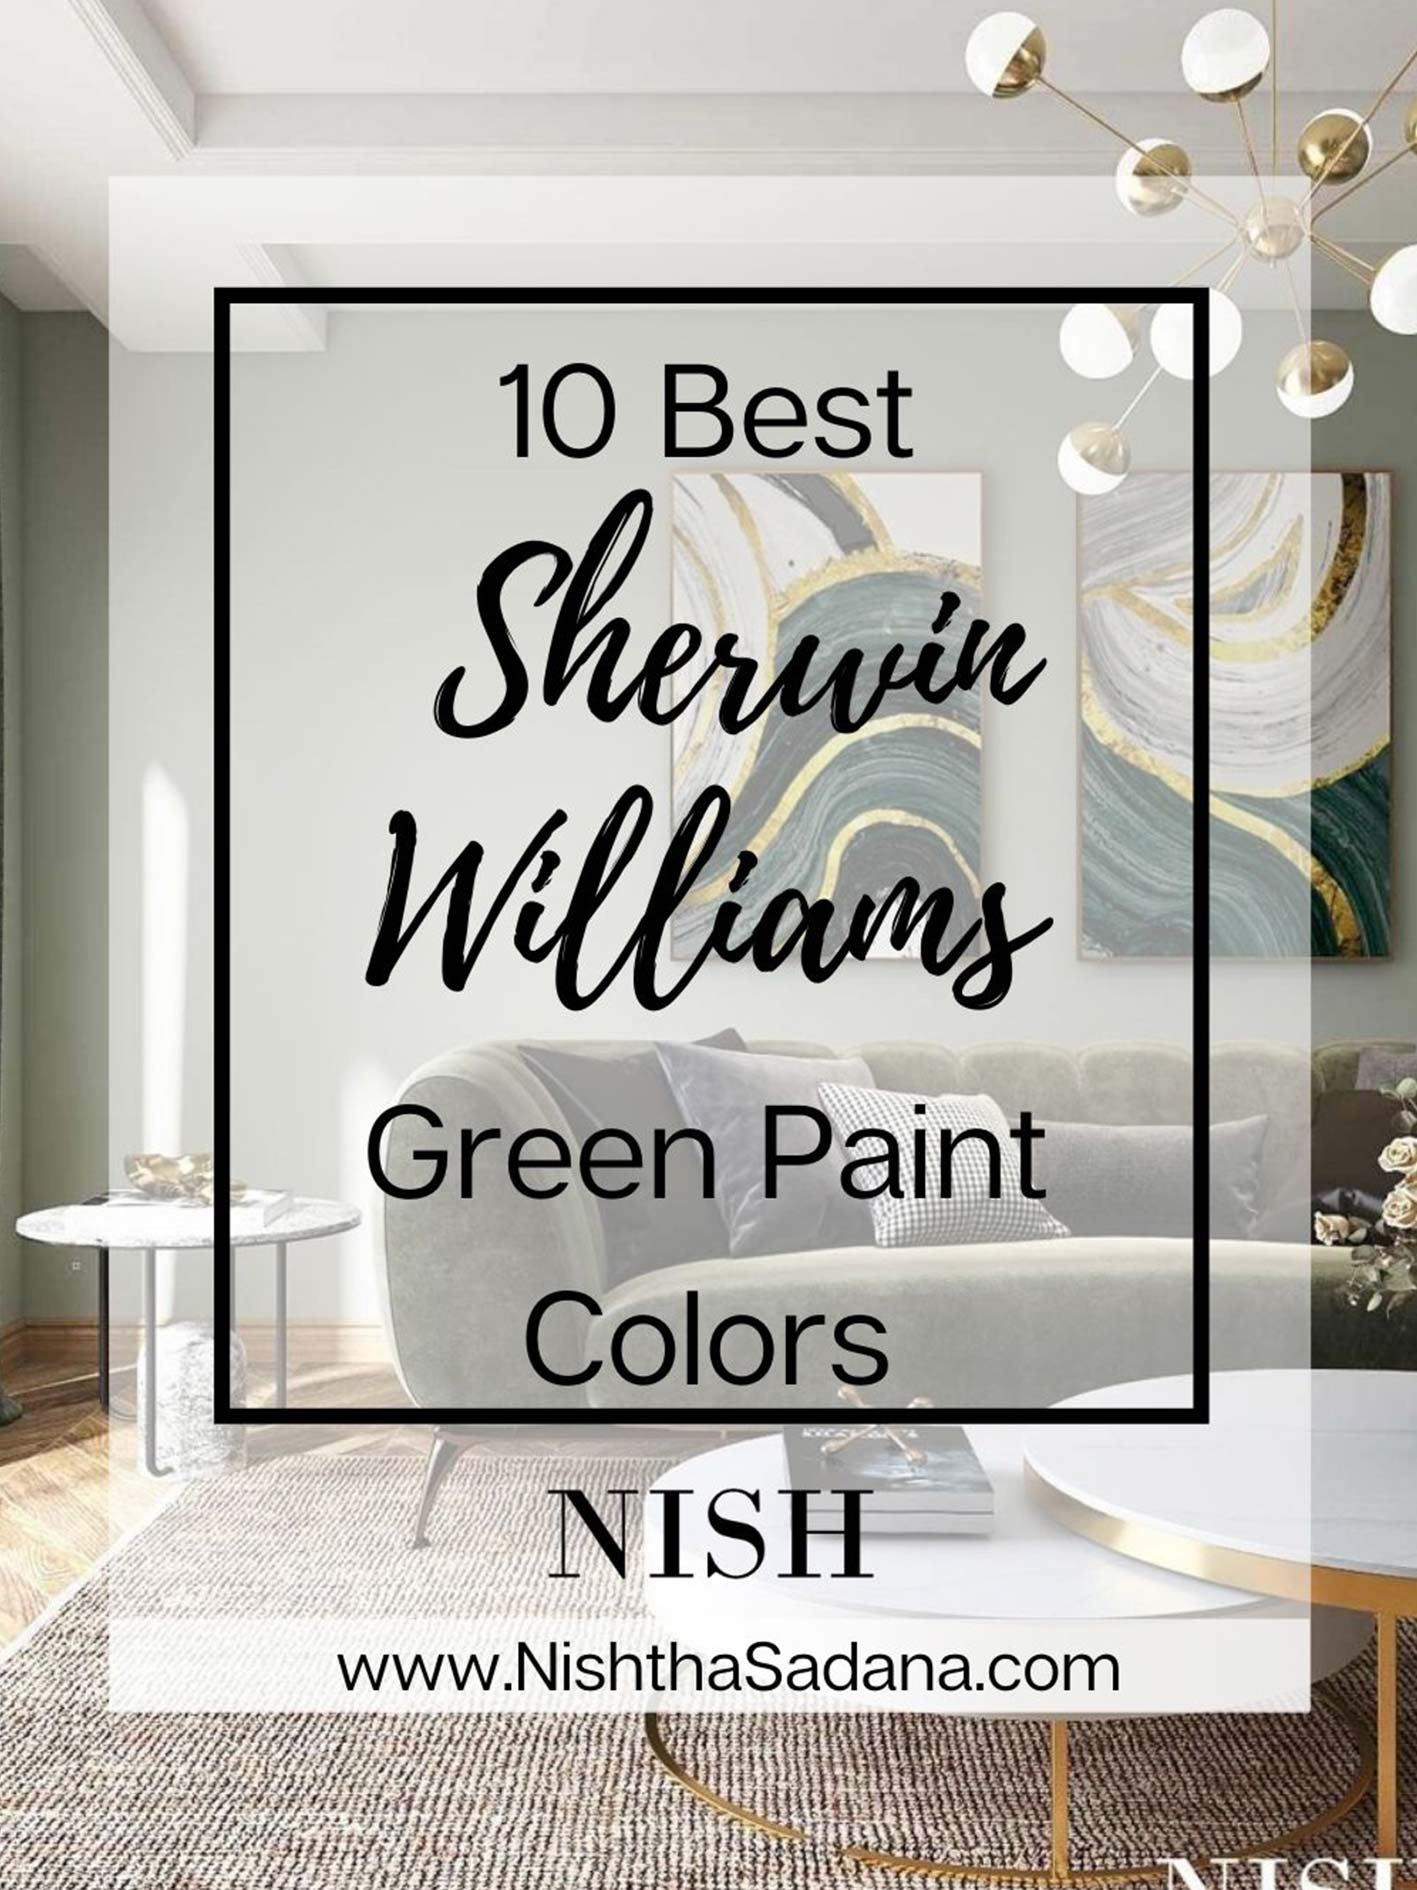 10 Best Sherwin Williams Green Paint Colors NISH | vlr.eng.br